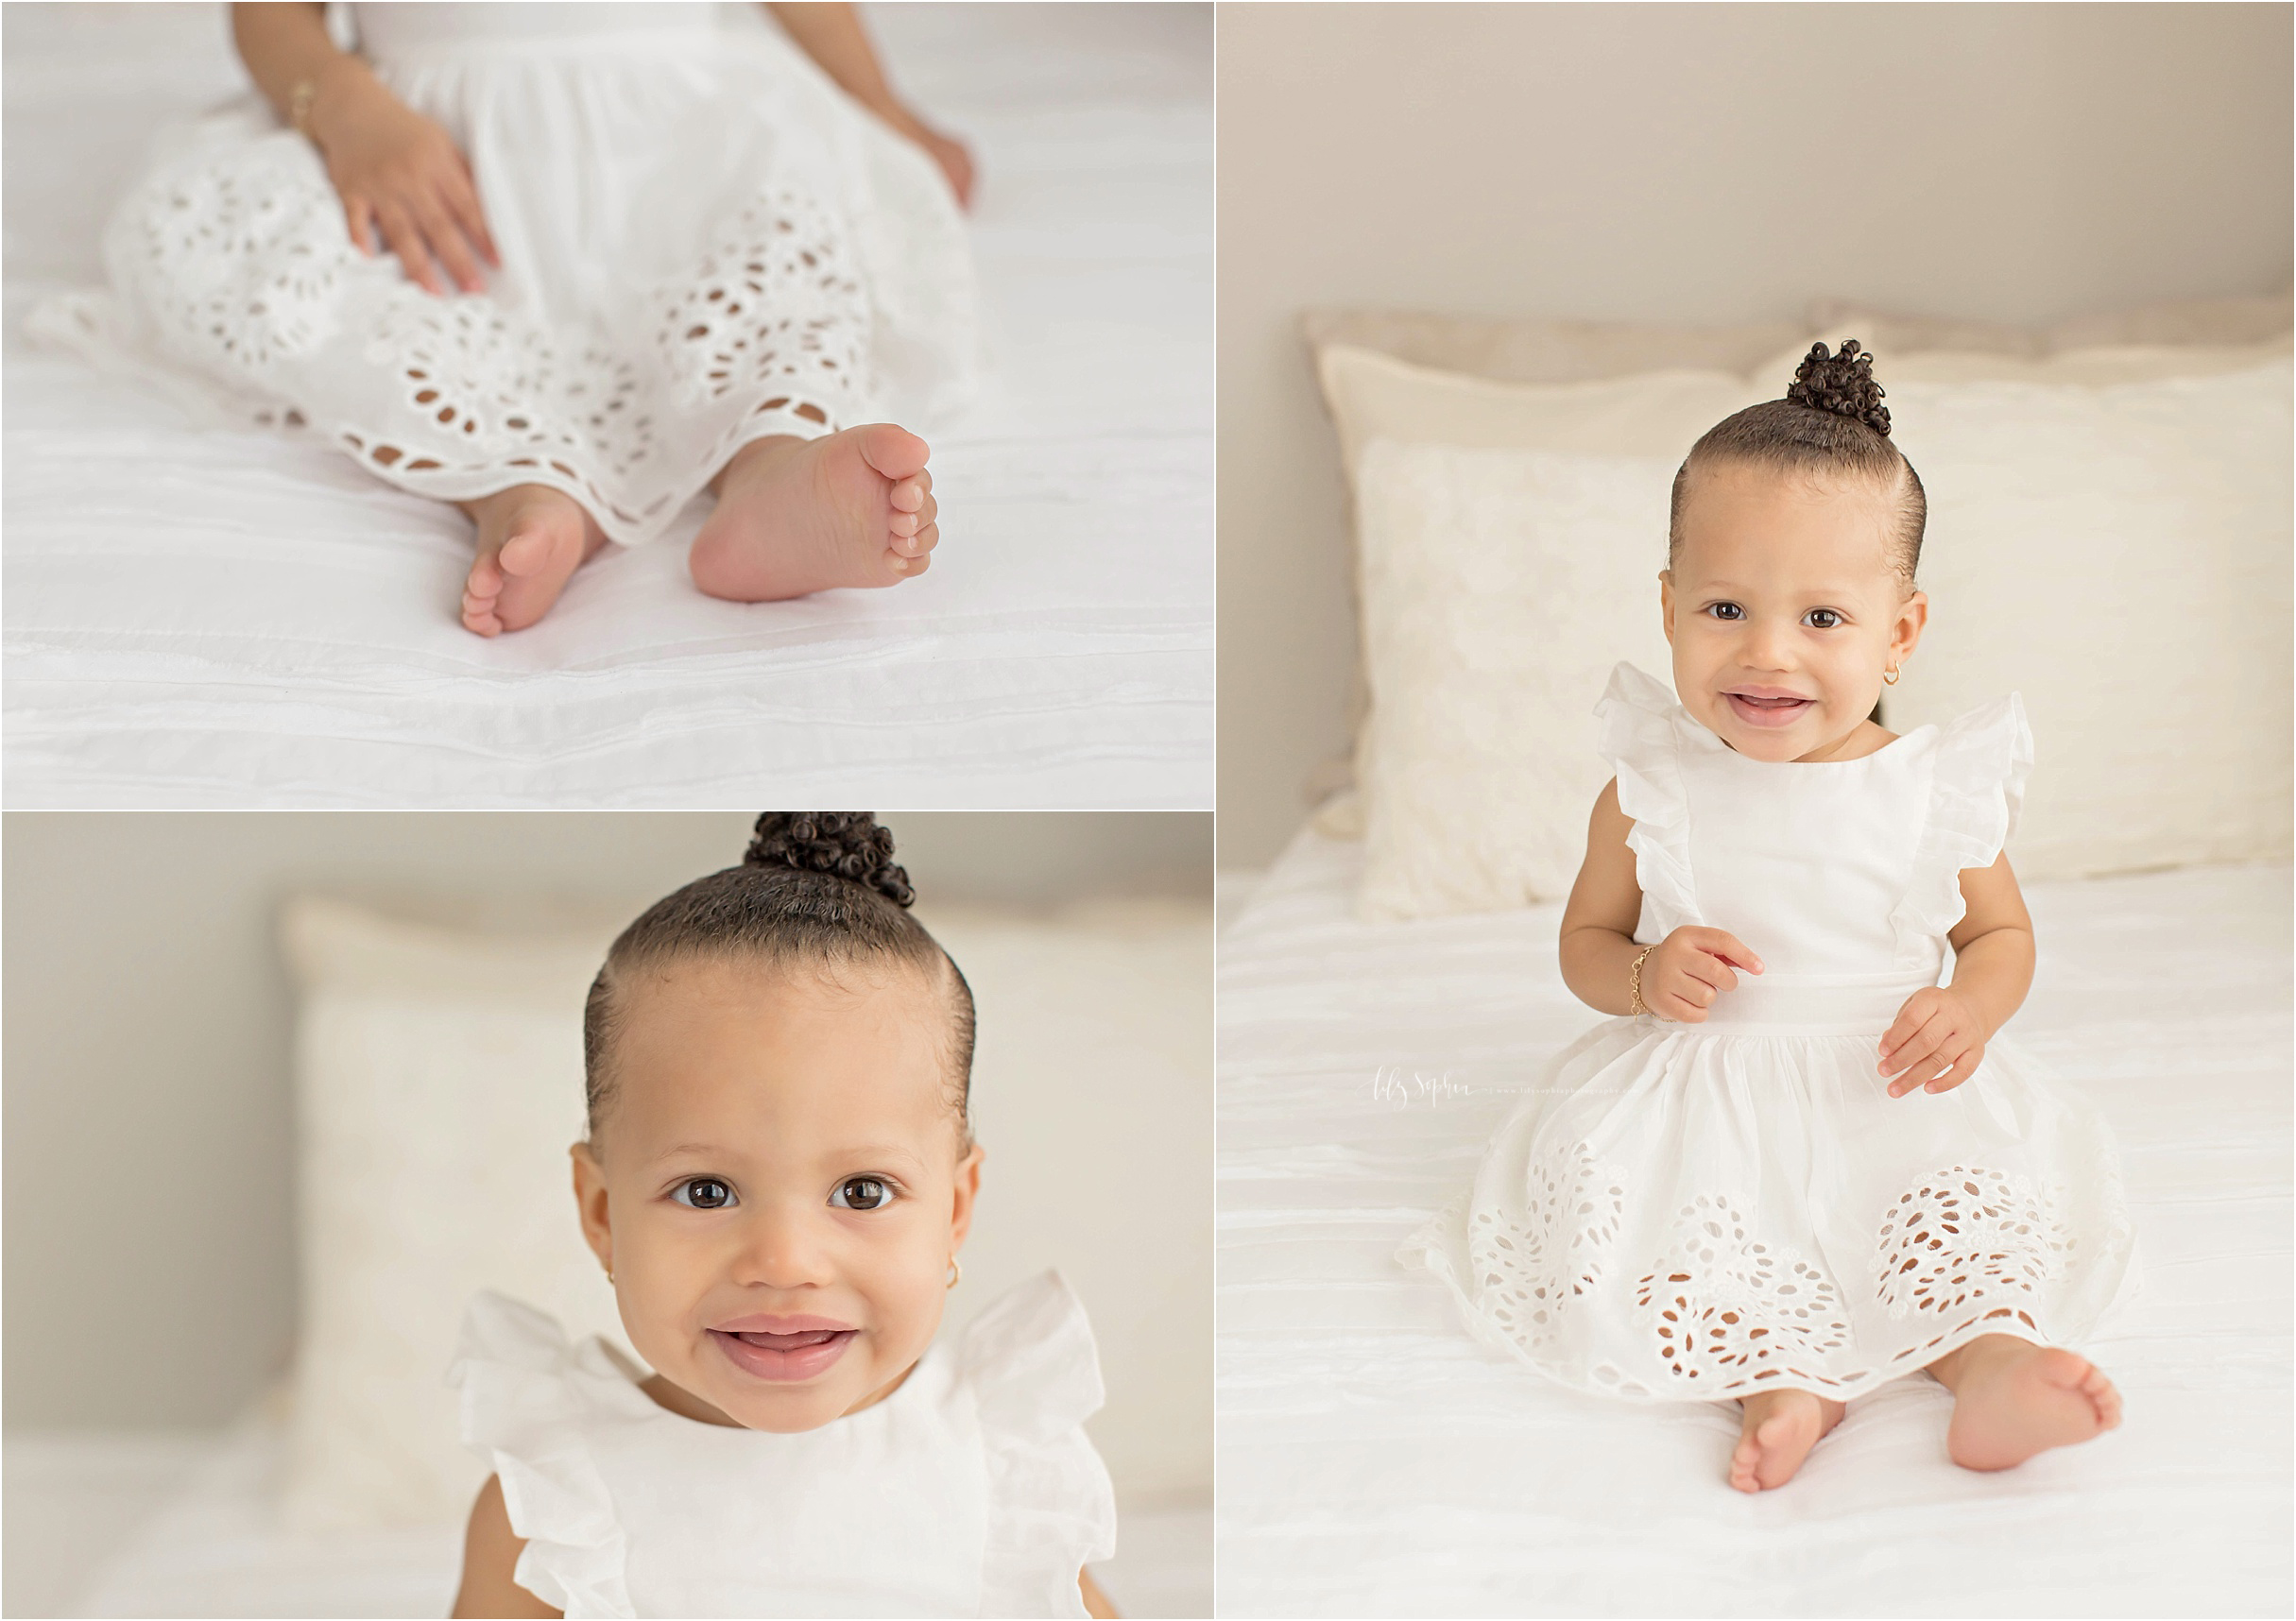  Image collage of a one year old, African American, baby girl., sitting on a bed, with her hair in a bun, smiling.&nbsp; 